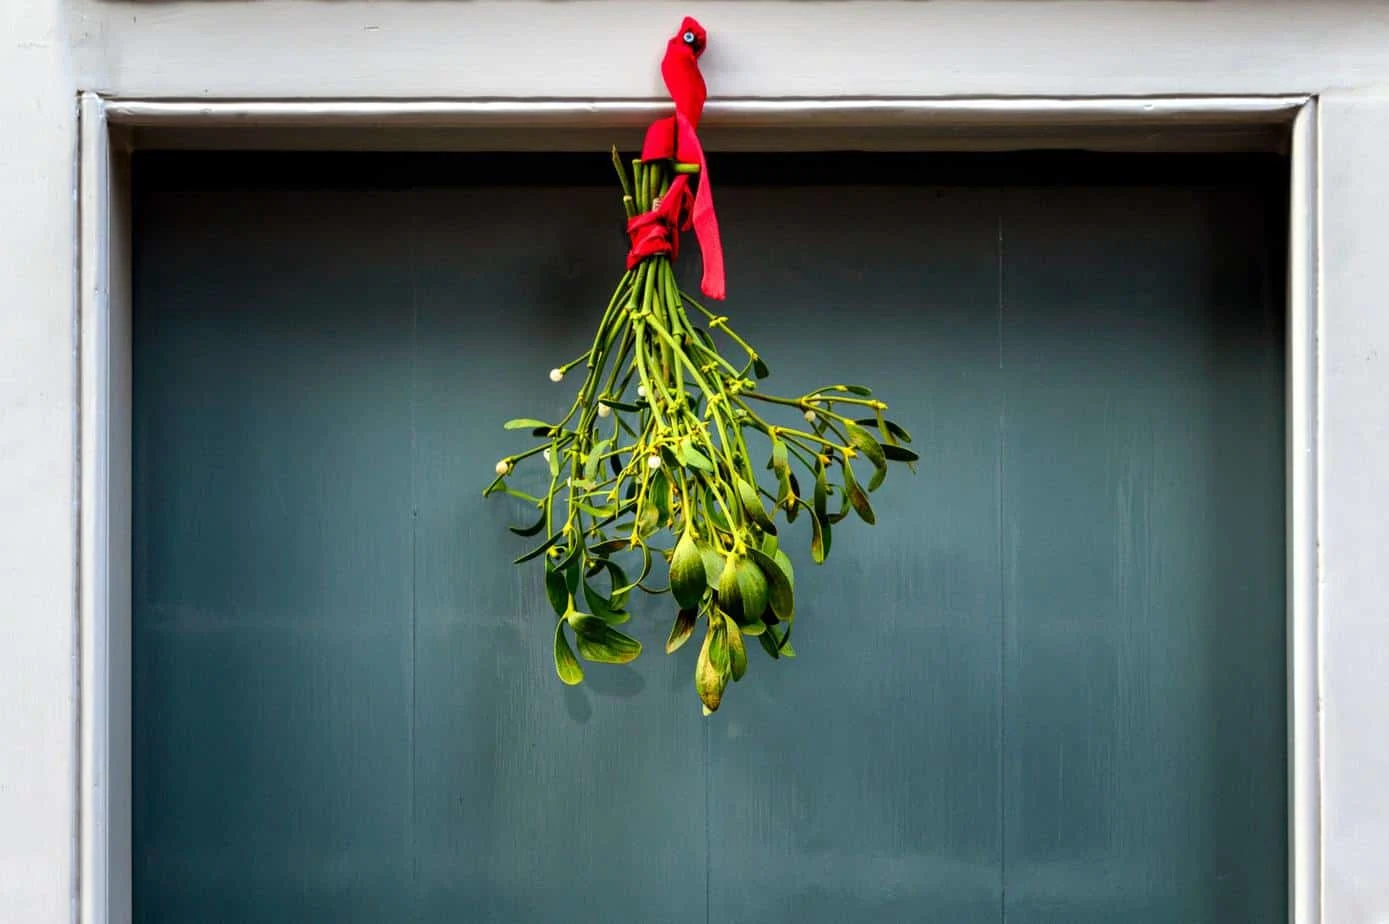 Irish new years traditions put some mistletoe under your pillow the night before